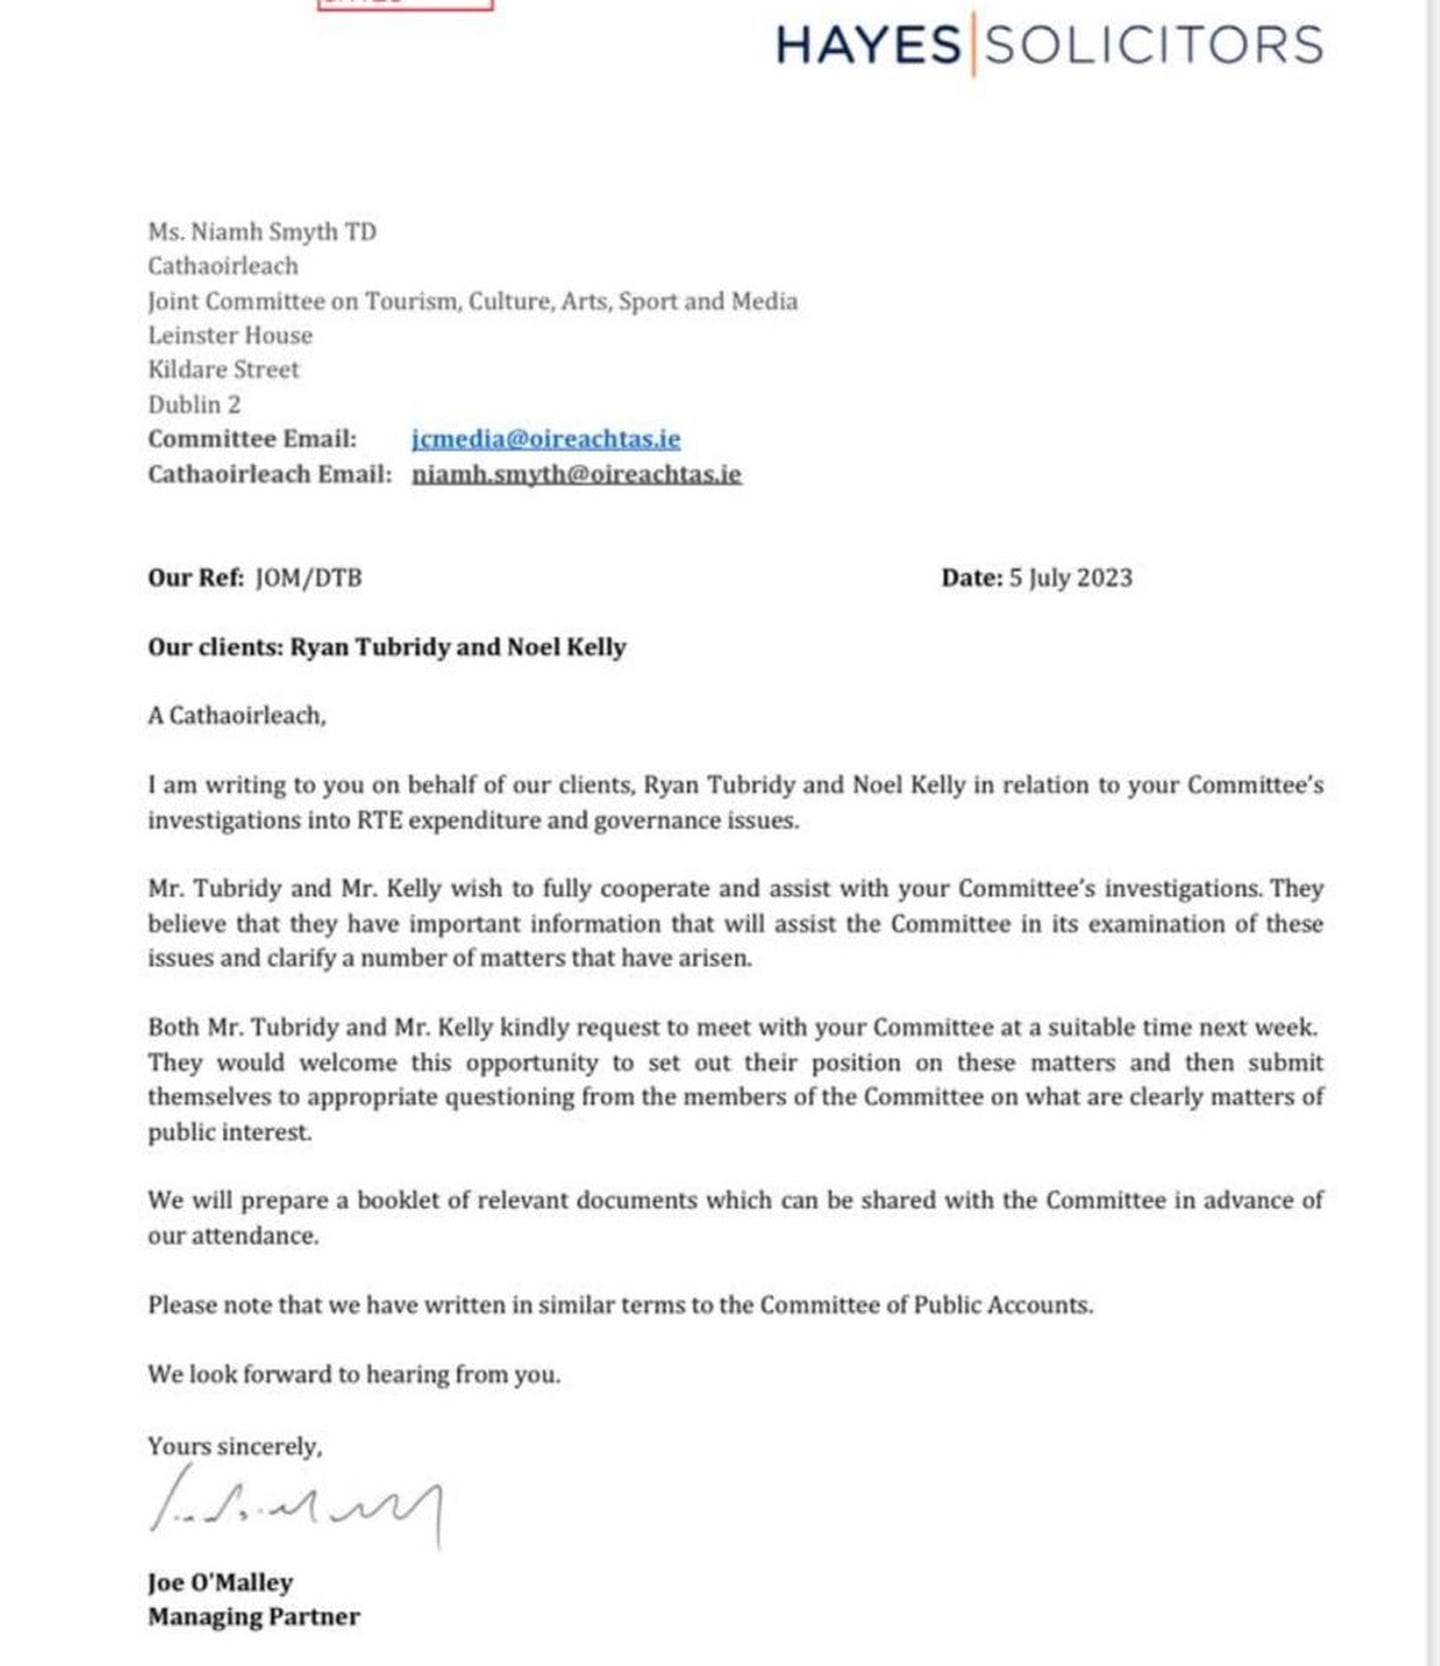 RTE letter: Ryan Tubridy and Noel Kelly volunteer to go to the media commitee.